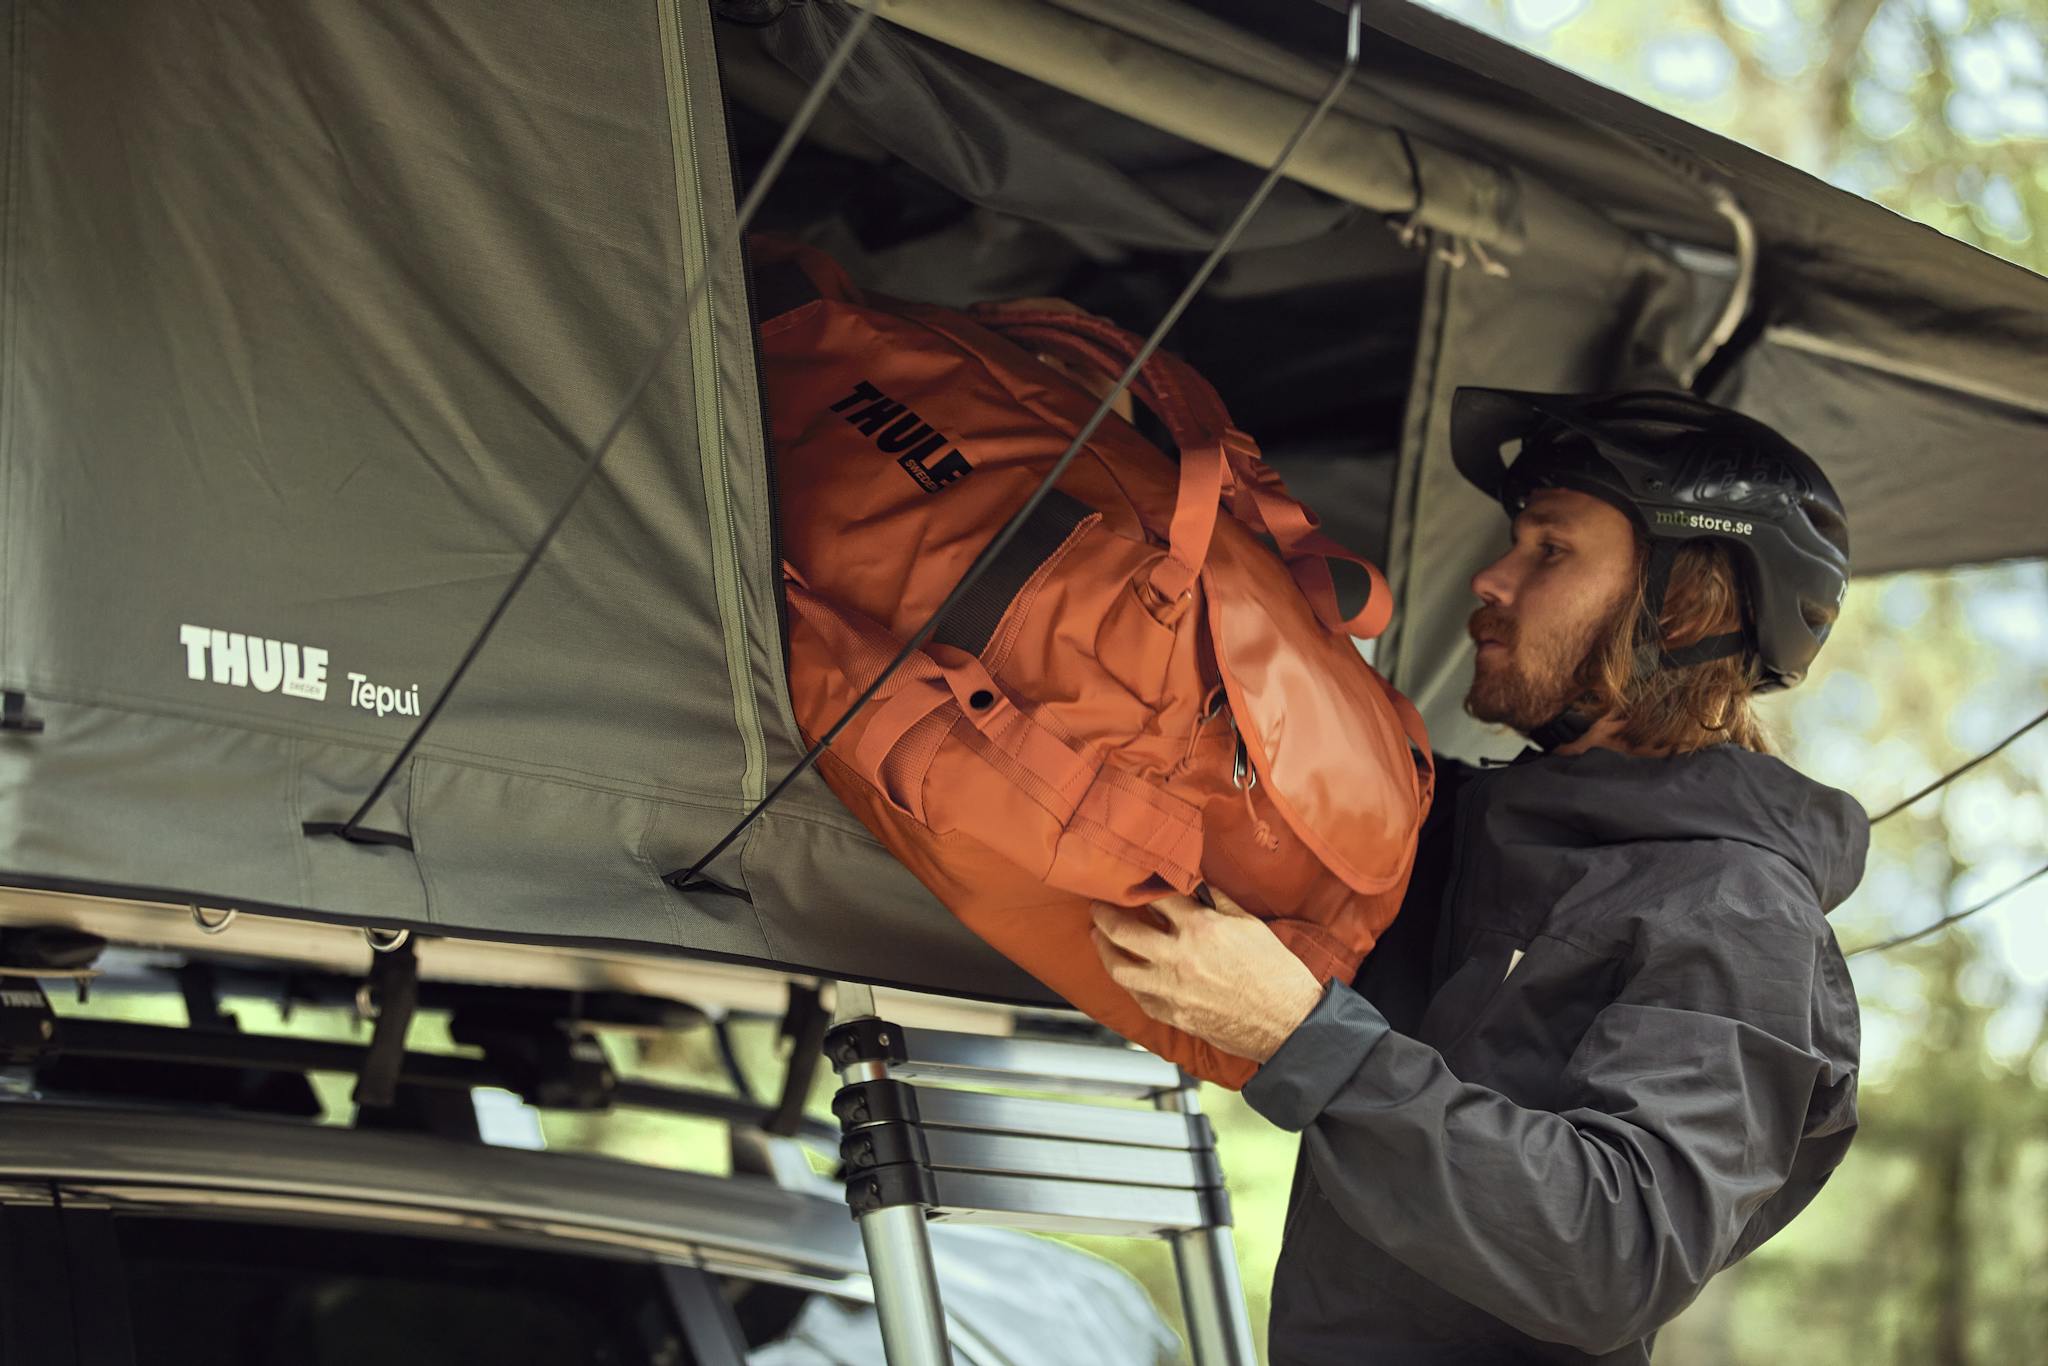 Thule Rooftop Tents & Accessories